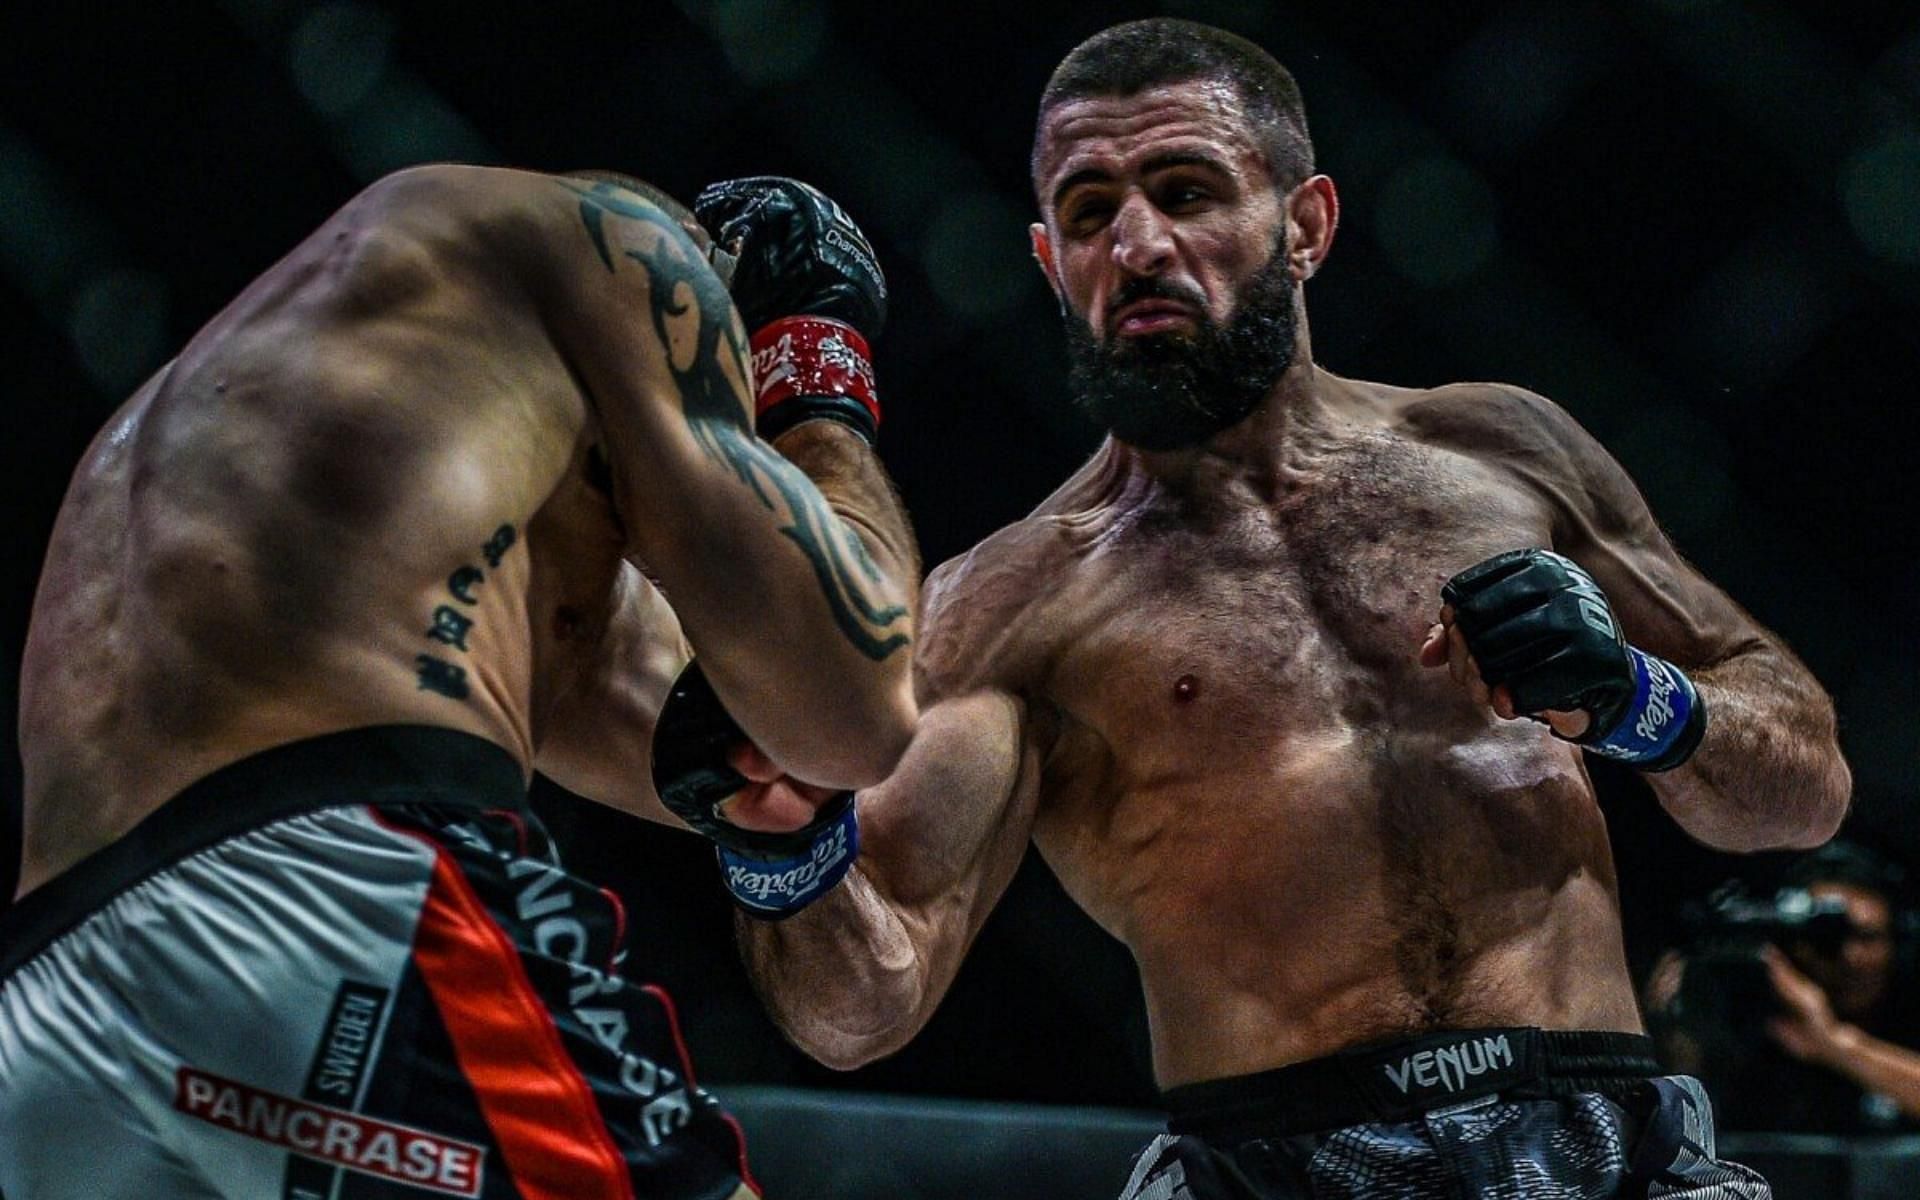 ONE welterweight champion Kiamrian Abbasov will headline the ONE Championship fight card of ONE: Full Circle. (Image courtesy of ONE Championship)